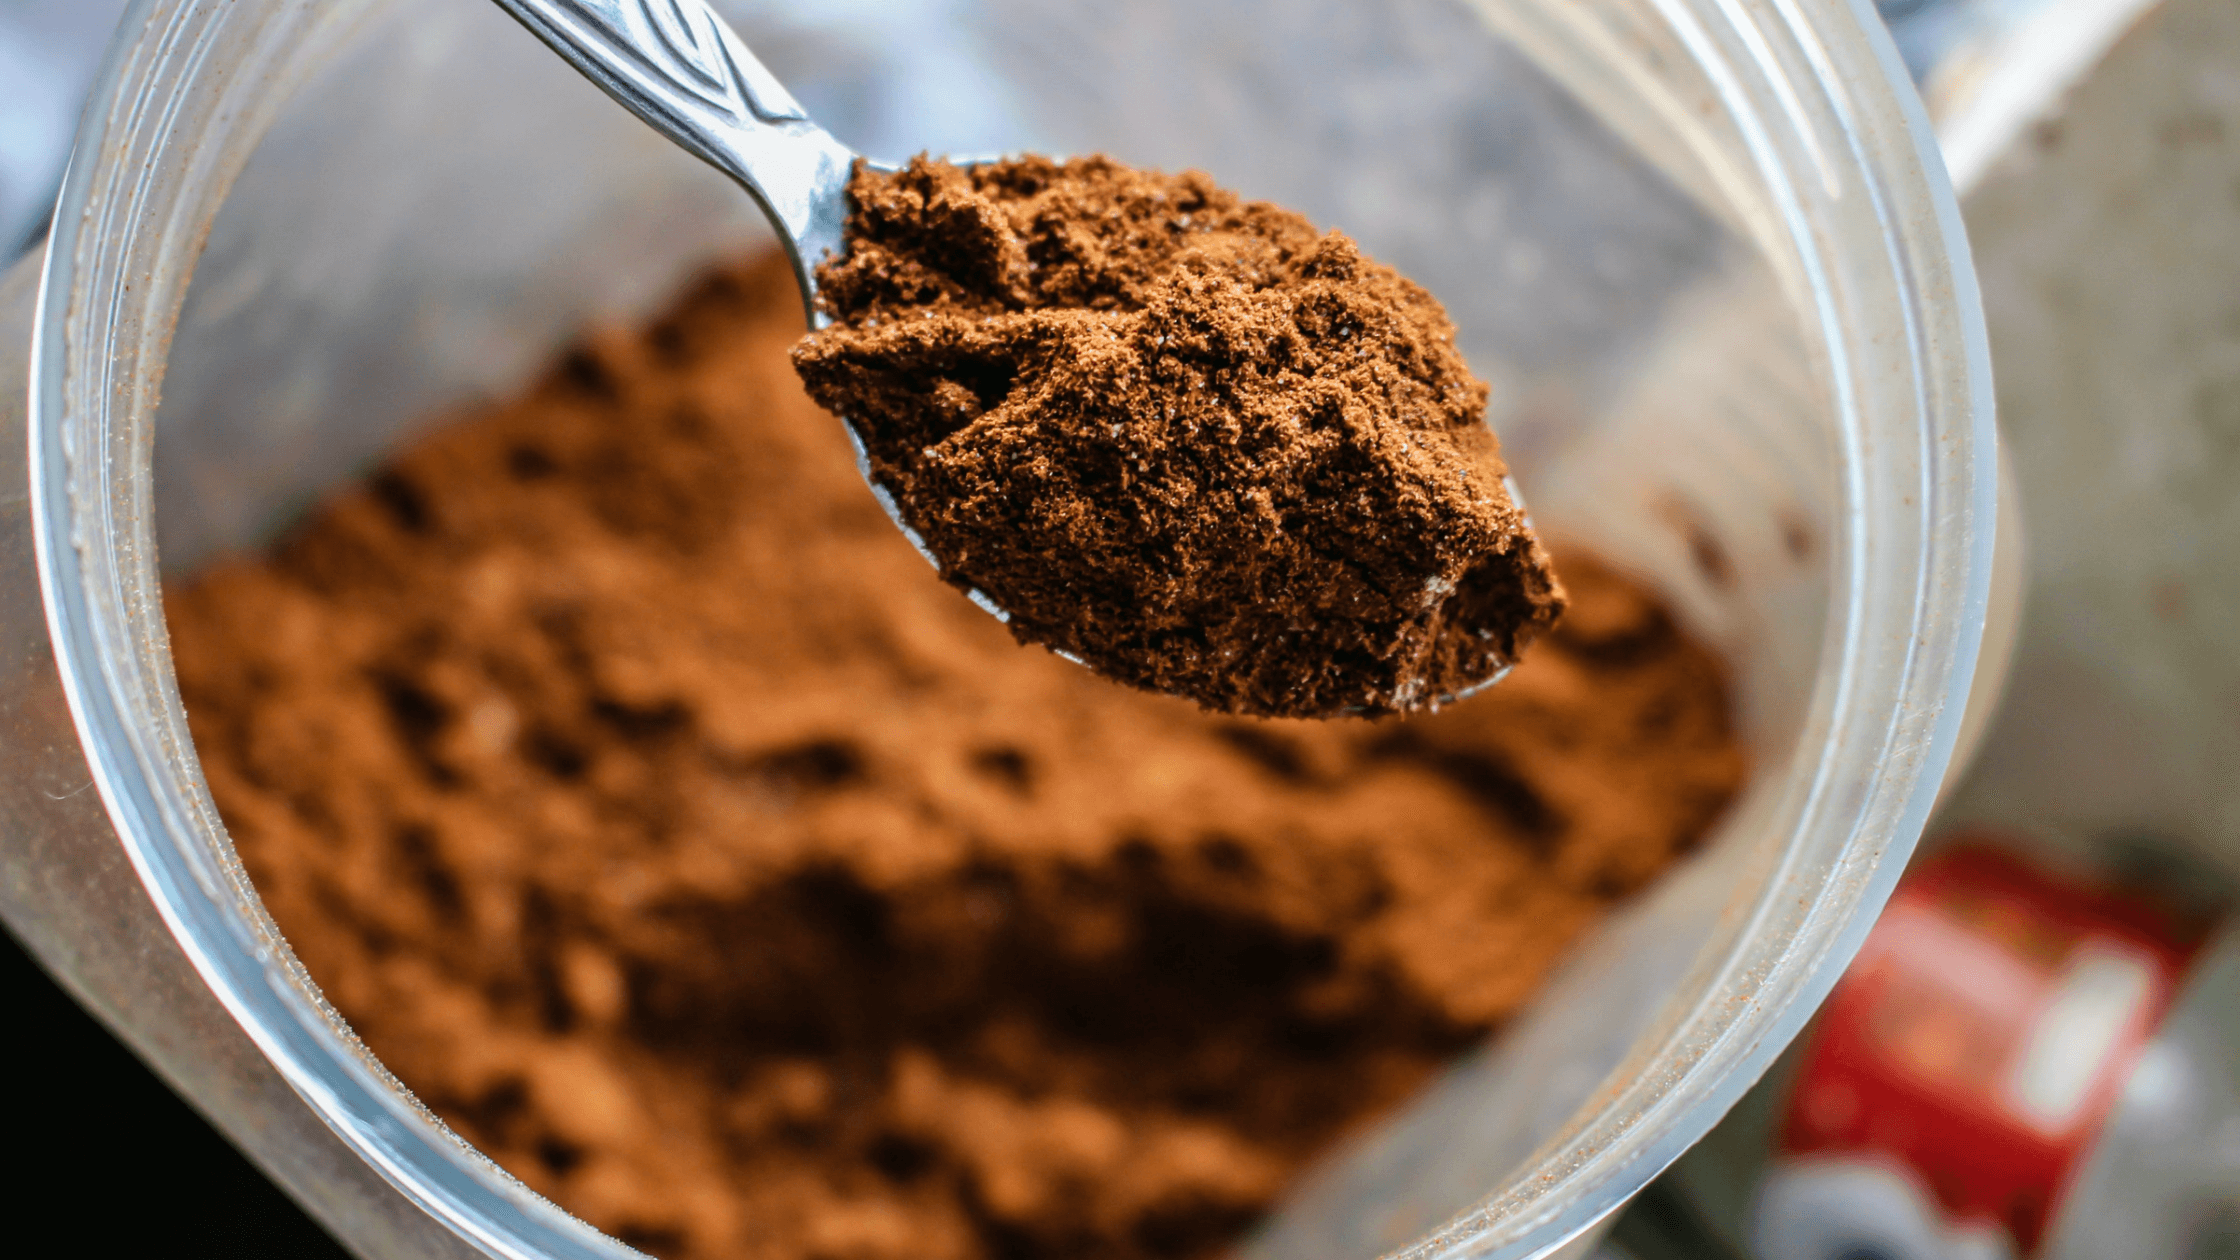 Pre-Workout Supplements: Should I Take Them?